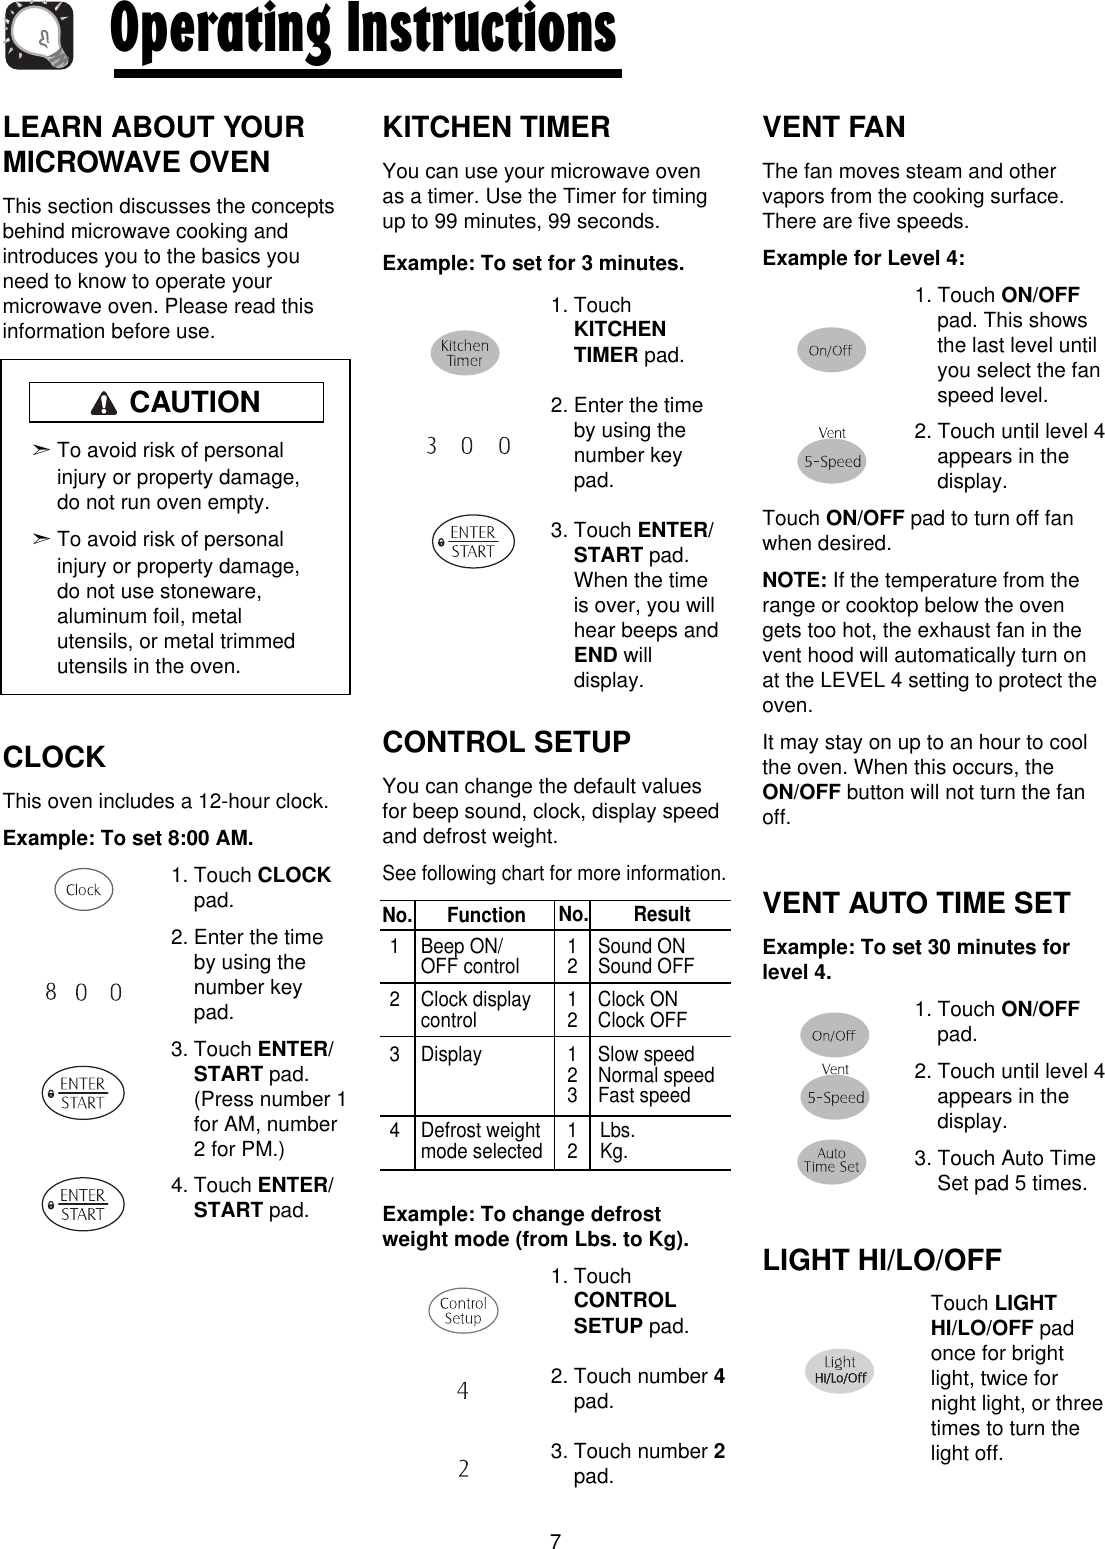 LEARN ABOUT YOURMICROWAVE OVENThis section discusses the conceptsbehind microwave cooking andintroduces you to the basics youneed to know to operate yourmicrowave oven. Please read thisinformation before use.CLOCKThis oven includes a 12-hour clock.Example: To set 8:00 AM.1. Touch CLOCKpad.2. Enter the timeby using thenumber keypad.3. Touch ENTER/START pad.(Press number 1for AM, number2 for PM.)4. Touch ENTER/START pad.KITCHEN TIMERYou can use your microwave ovenas a timer. Use the Timer for timingup to 99 minutes, 99 seconds.Example: To set for 3 minutes.1. TouchKITCHENTIMER pad.2. Enter the timeby using thenumber keypad.3. Touch ENTER/START pad.When the timeis over, you willhear beeps andEND willdisplay.CONTROL SETUPYou can change the default valuesfor beep sound, clock, display speedand defrost weight. See following chart for more information.Example: To change defrostweight mode (from Lbs. to Kg).1. TouchCONTROLSETUP pad.2. Touch number 4pad.3. Touch number 2pad.VENT FANThe fan moves steam and othervapors from the cooking surface.There are five speeds. Example for Level 4:1. Touch ON/OFFpad. This showsthe last level untilyou select the fanspeed level.2. Touch until level 4appears in thedisplay.Touch ON/OFF pad to turn off fanwhen desired. NOTE: If the temperature from therange or cooktop below the ovengets too hot, the exhaust fan in thevent hood will automatically turn onat the LEVEL 4 setting to protect theoven. It may stay on up to an hour to coolthe oven. When this occurs, theON/OFF button will not turn the fanoff.VENT AUTO TIME SETExample: To set 30 minutes forlevel 4.1. Touch ON/OFFpad.2. Touch until level 4appears in thedisplay.3. Touch Auto TimeSet pad 5 times.LIGHT HI/LO/OFFTouch LIGHTHI/LO/OFF padonce for brightlight, twice fornight light, or threetimes to turn thelight off.7Operating Instructions➣To avoid risk of personalinjury or property damage,do not run oven empty.➣To avoid risk of personalinjury or property damage,do not use stoneware,aluminum foil, metalutensils, or metal trimmedutensils in the oven.No. Function1 Beep ON/ 1 Sound ONOFF control 2 Sound OFF2 Clock display 1 Clock ONcontrol 2 Clock OFF3 Display 1 Slow speed2 Normal speed3 Fast speed4 Defrost weight 1 Lbs.mode selected 2 Kg.No. ResultCAUTION